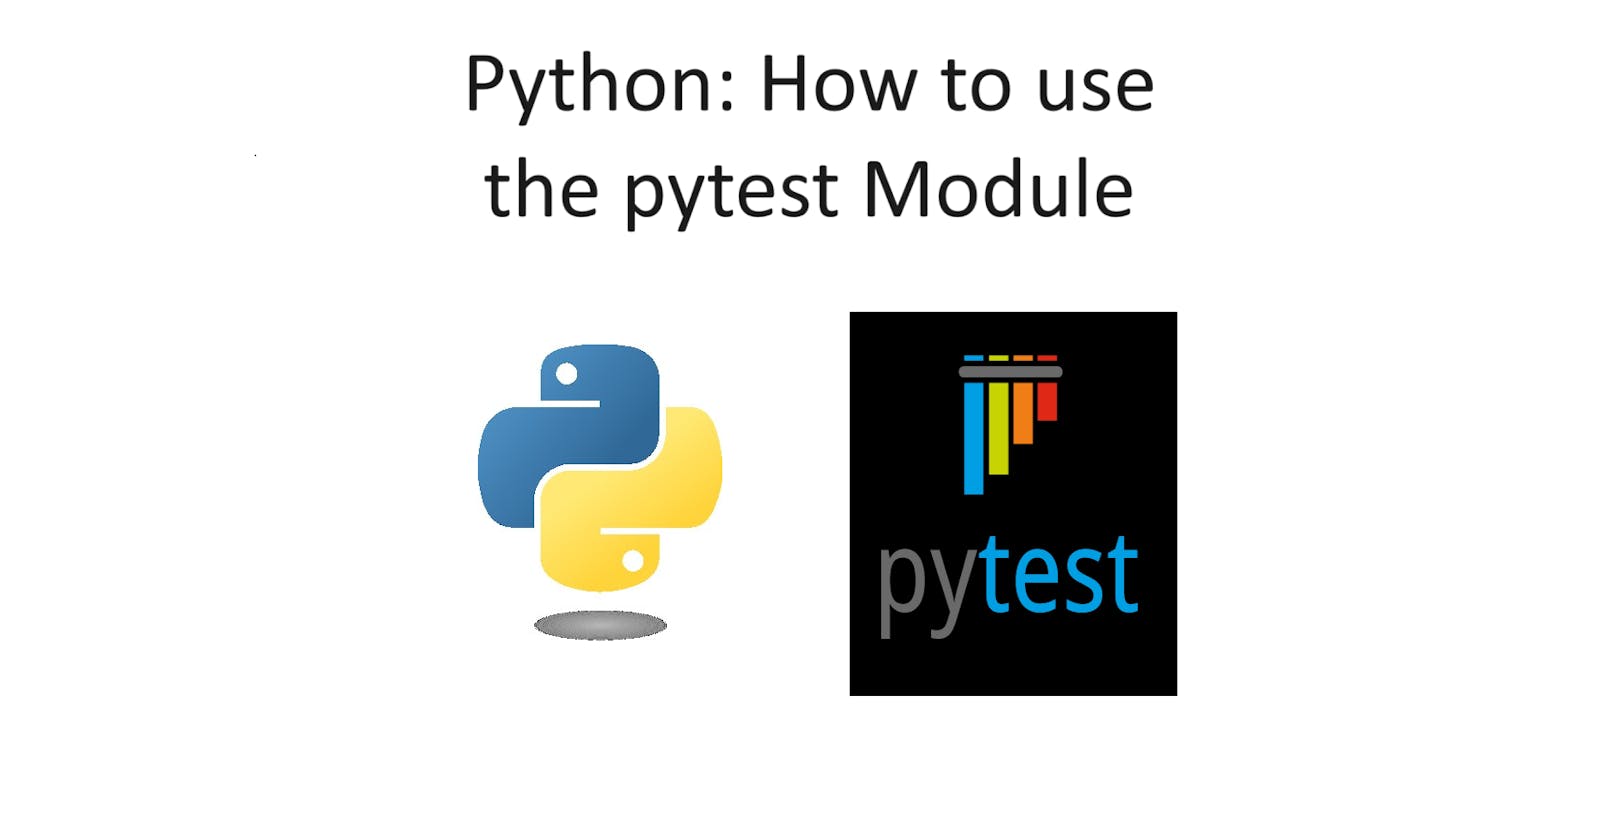 Python: How to use the "pytest" Module